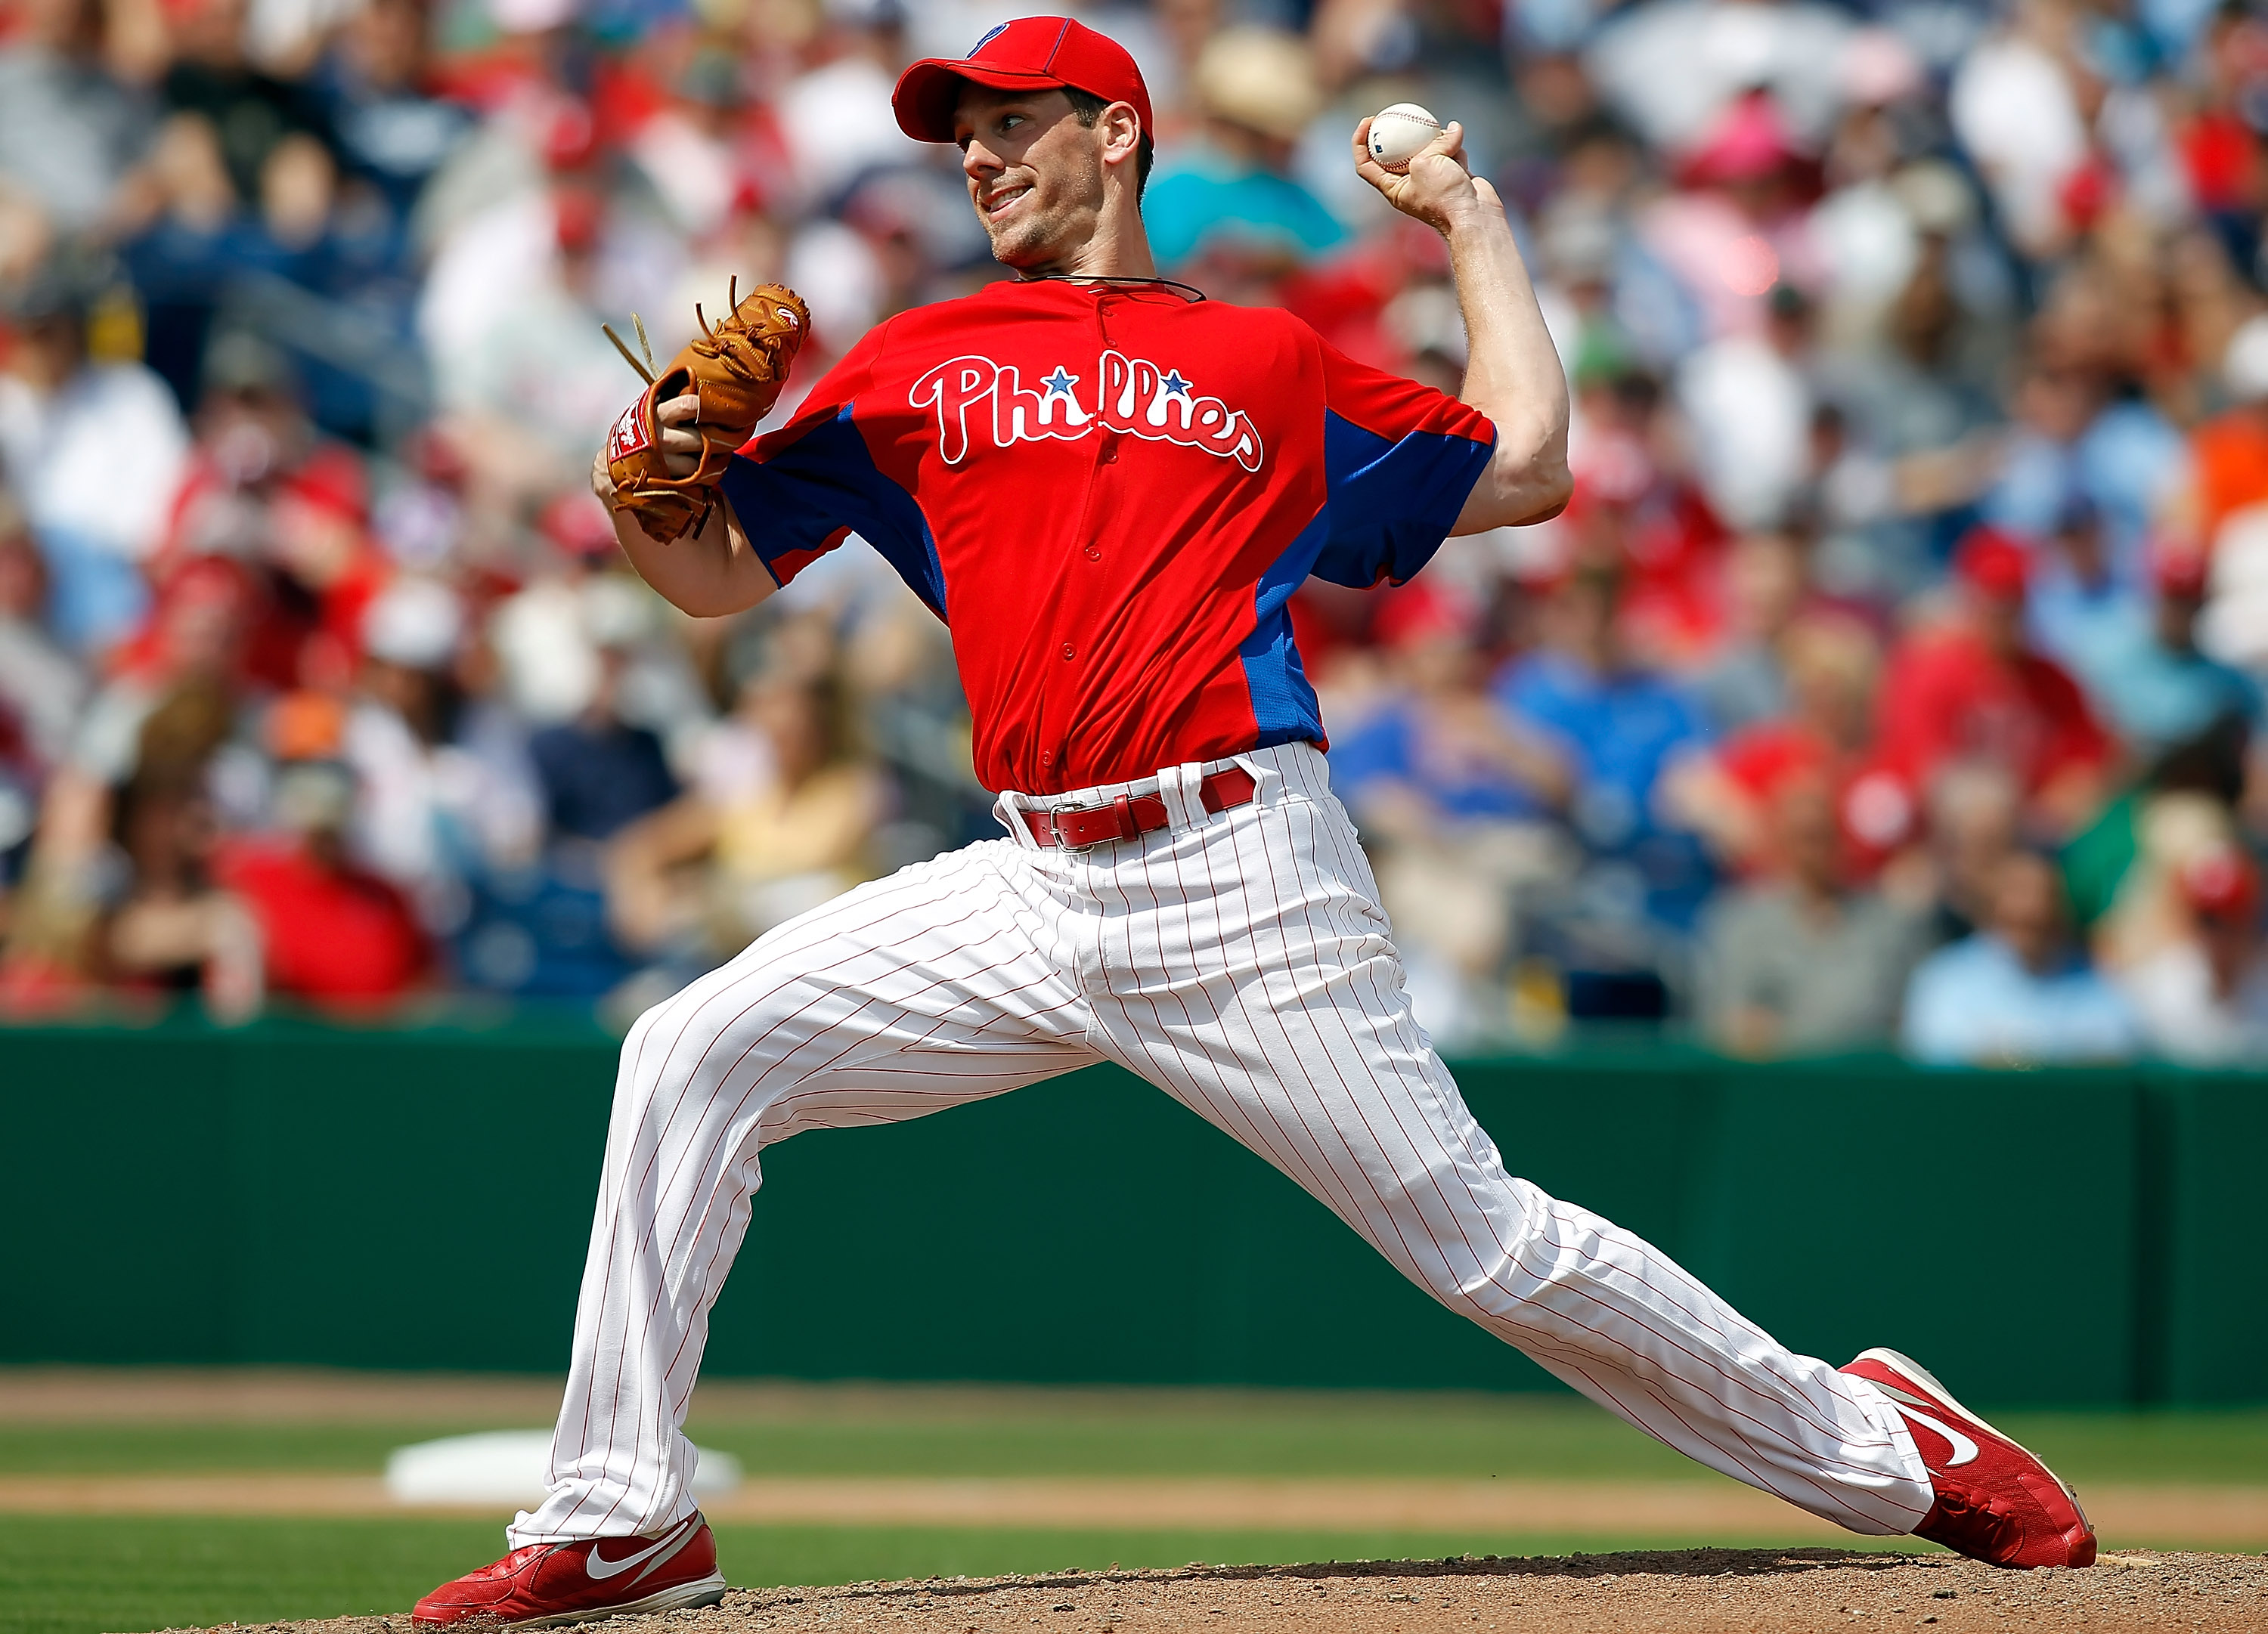 CLEARWATER, FL - MARCH 06:  Pitcher Cliff Lee #33 of the Philadelphia Phillies pitches against the Tampa Bay Rays during a Grapefruit League Spring Training Game at Bright House Field on March 6, 2011 in Sarasota, Florida.  (Photo by J. Meric/Getty Images